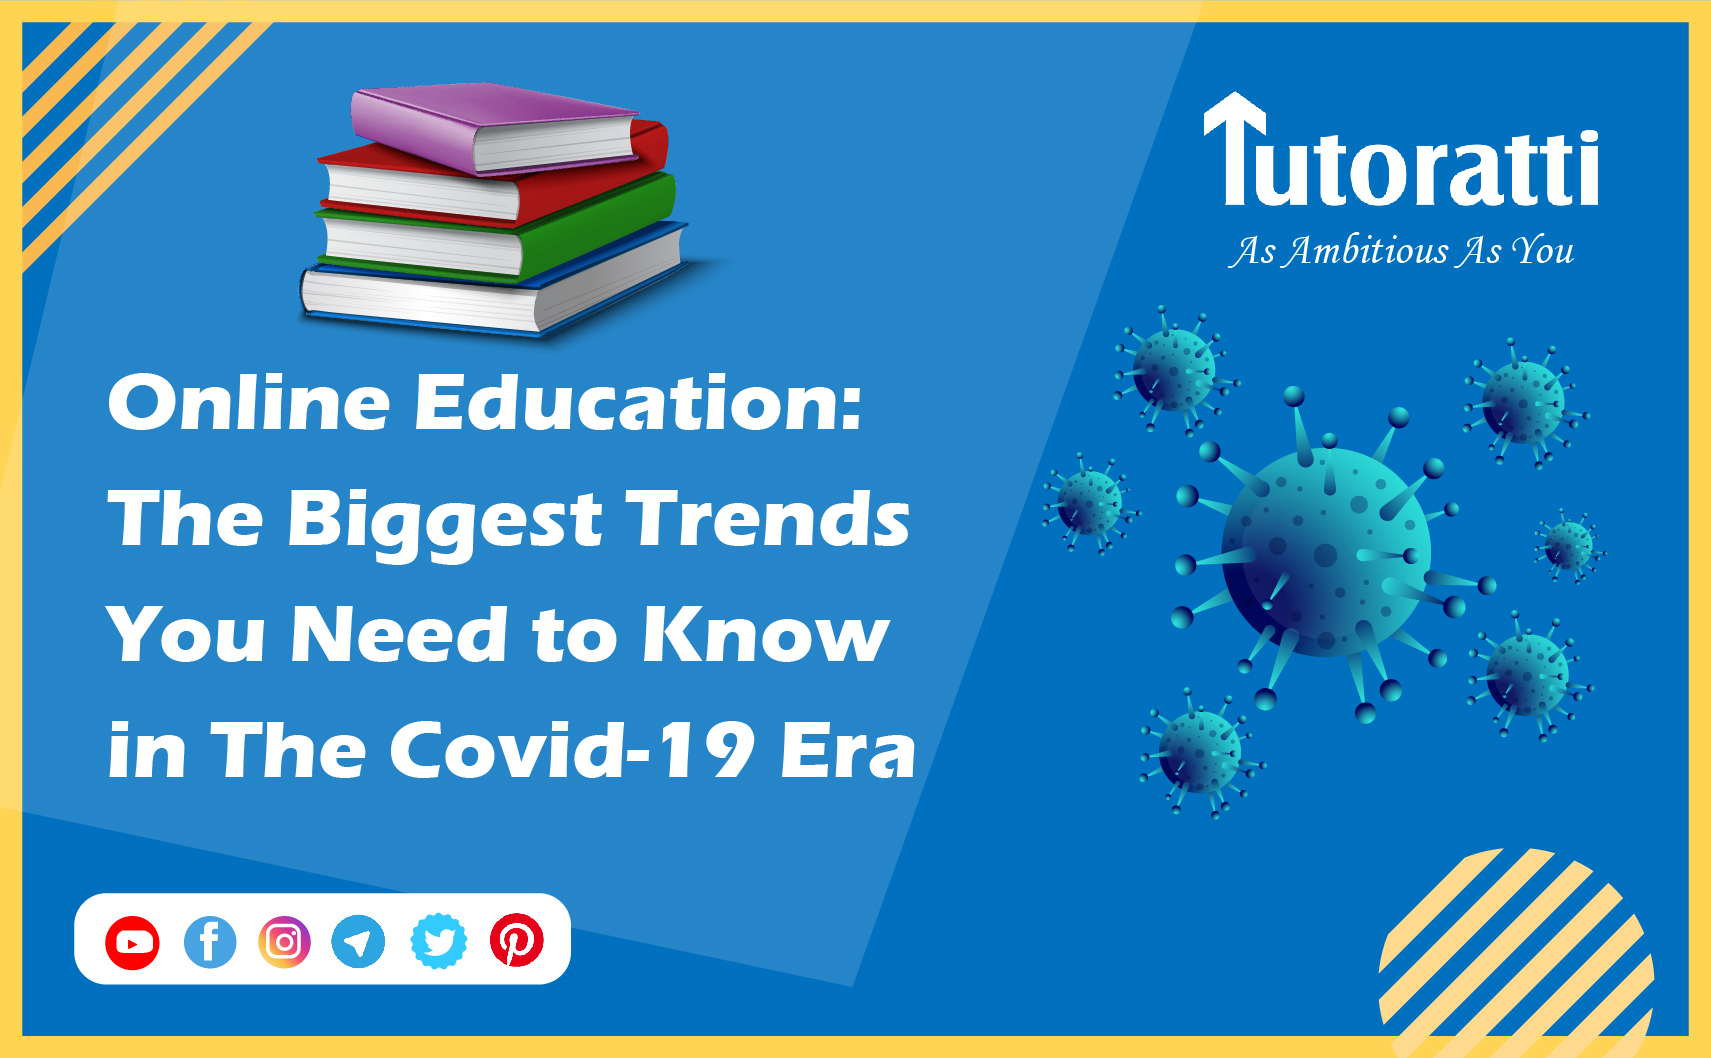 Online Education: The Biggest Trends You Need to Know in The Covid-19 Era